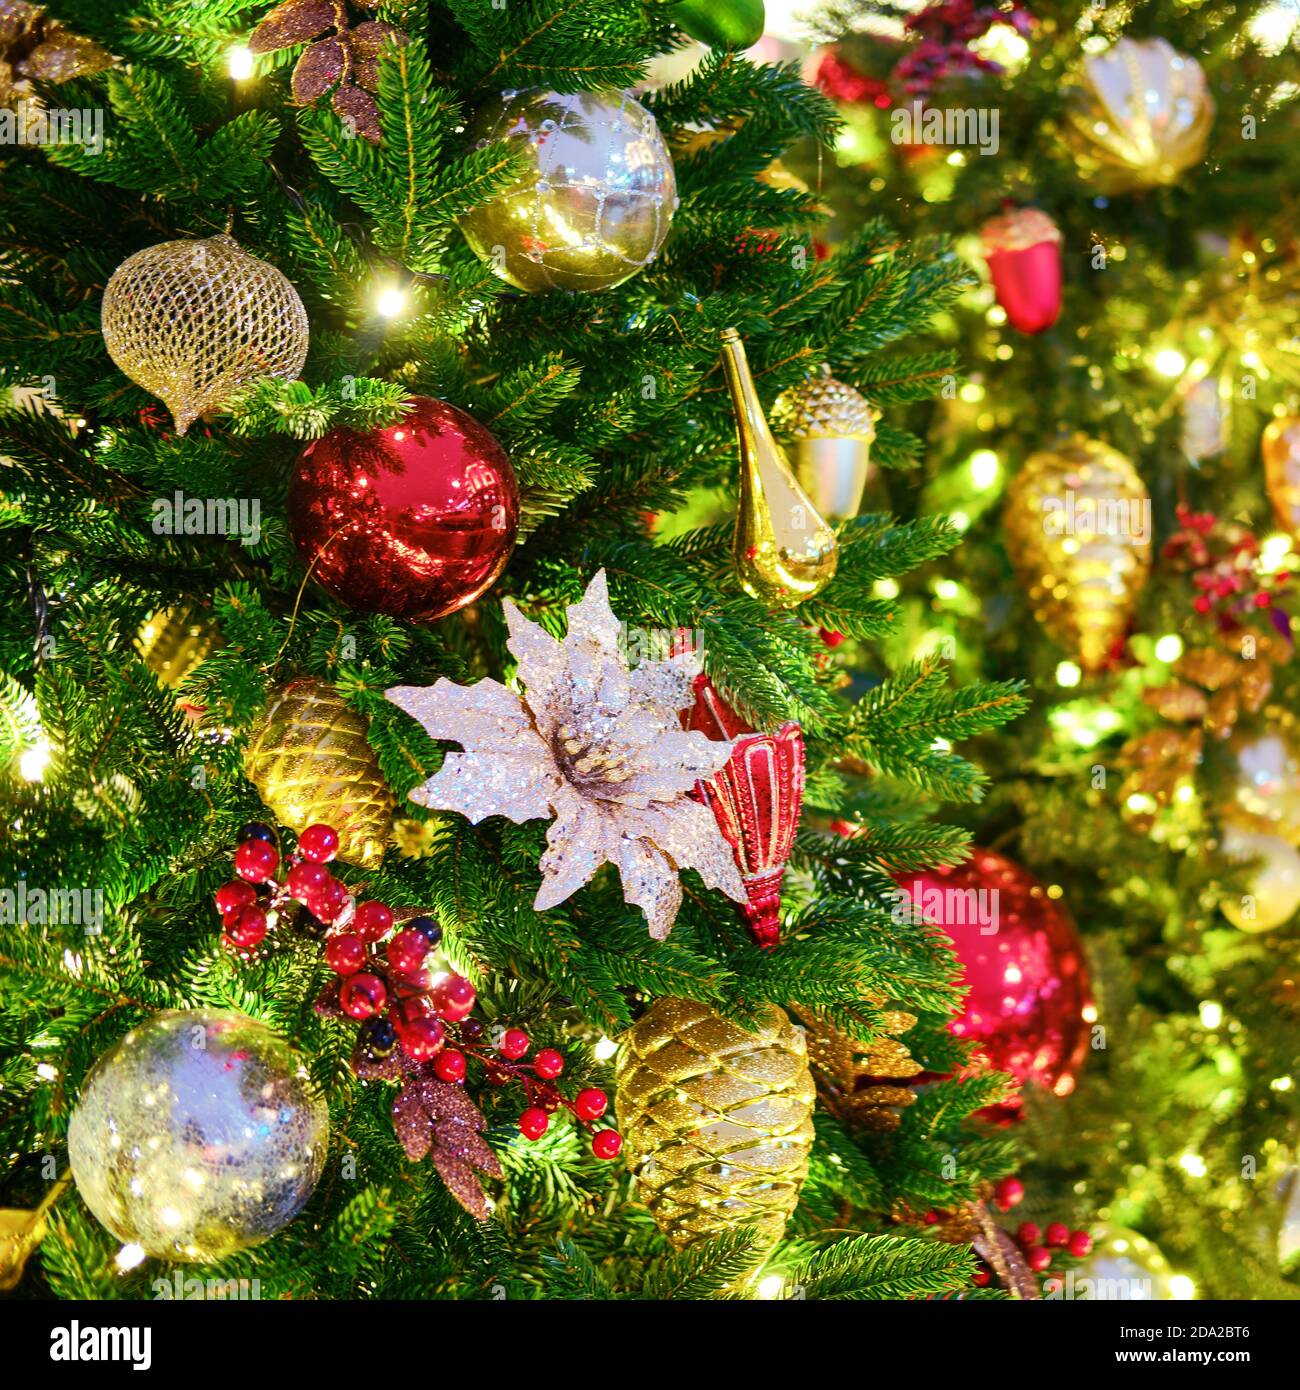 Christmas decoration of white poinsettia, bauble balls and red mistletoe Stock Photo